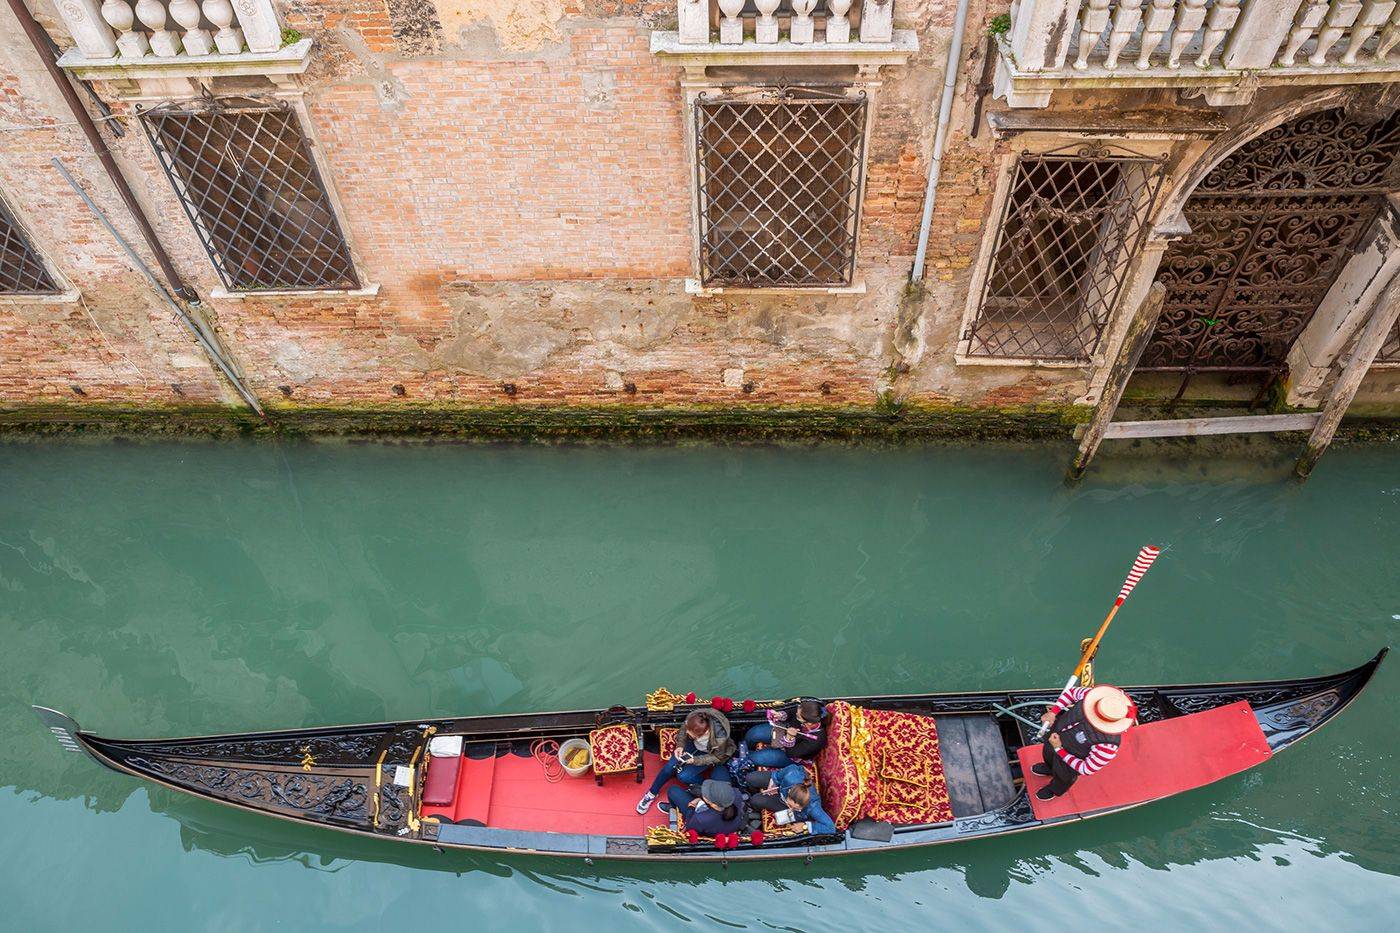 enjoy the serenades of the gondoliers rowing along the canal